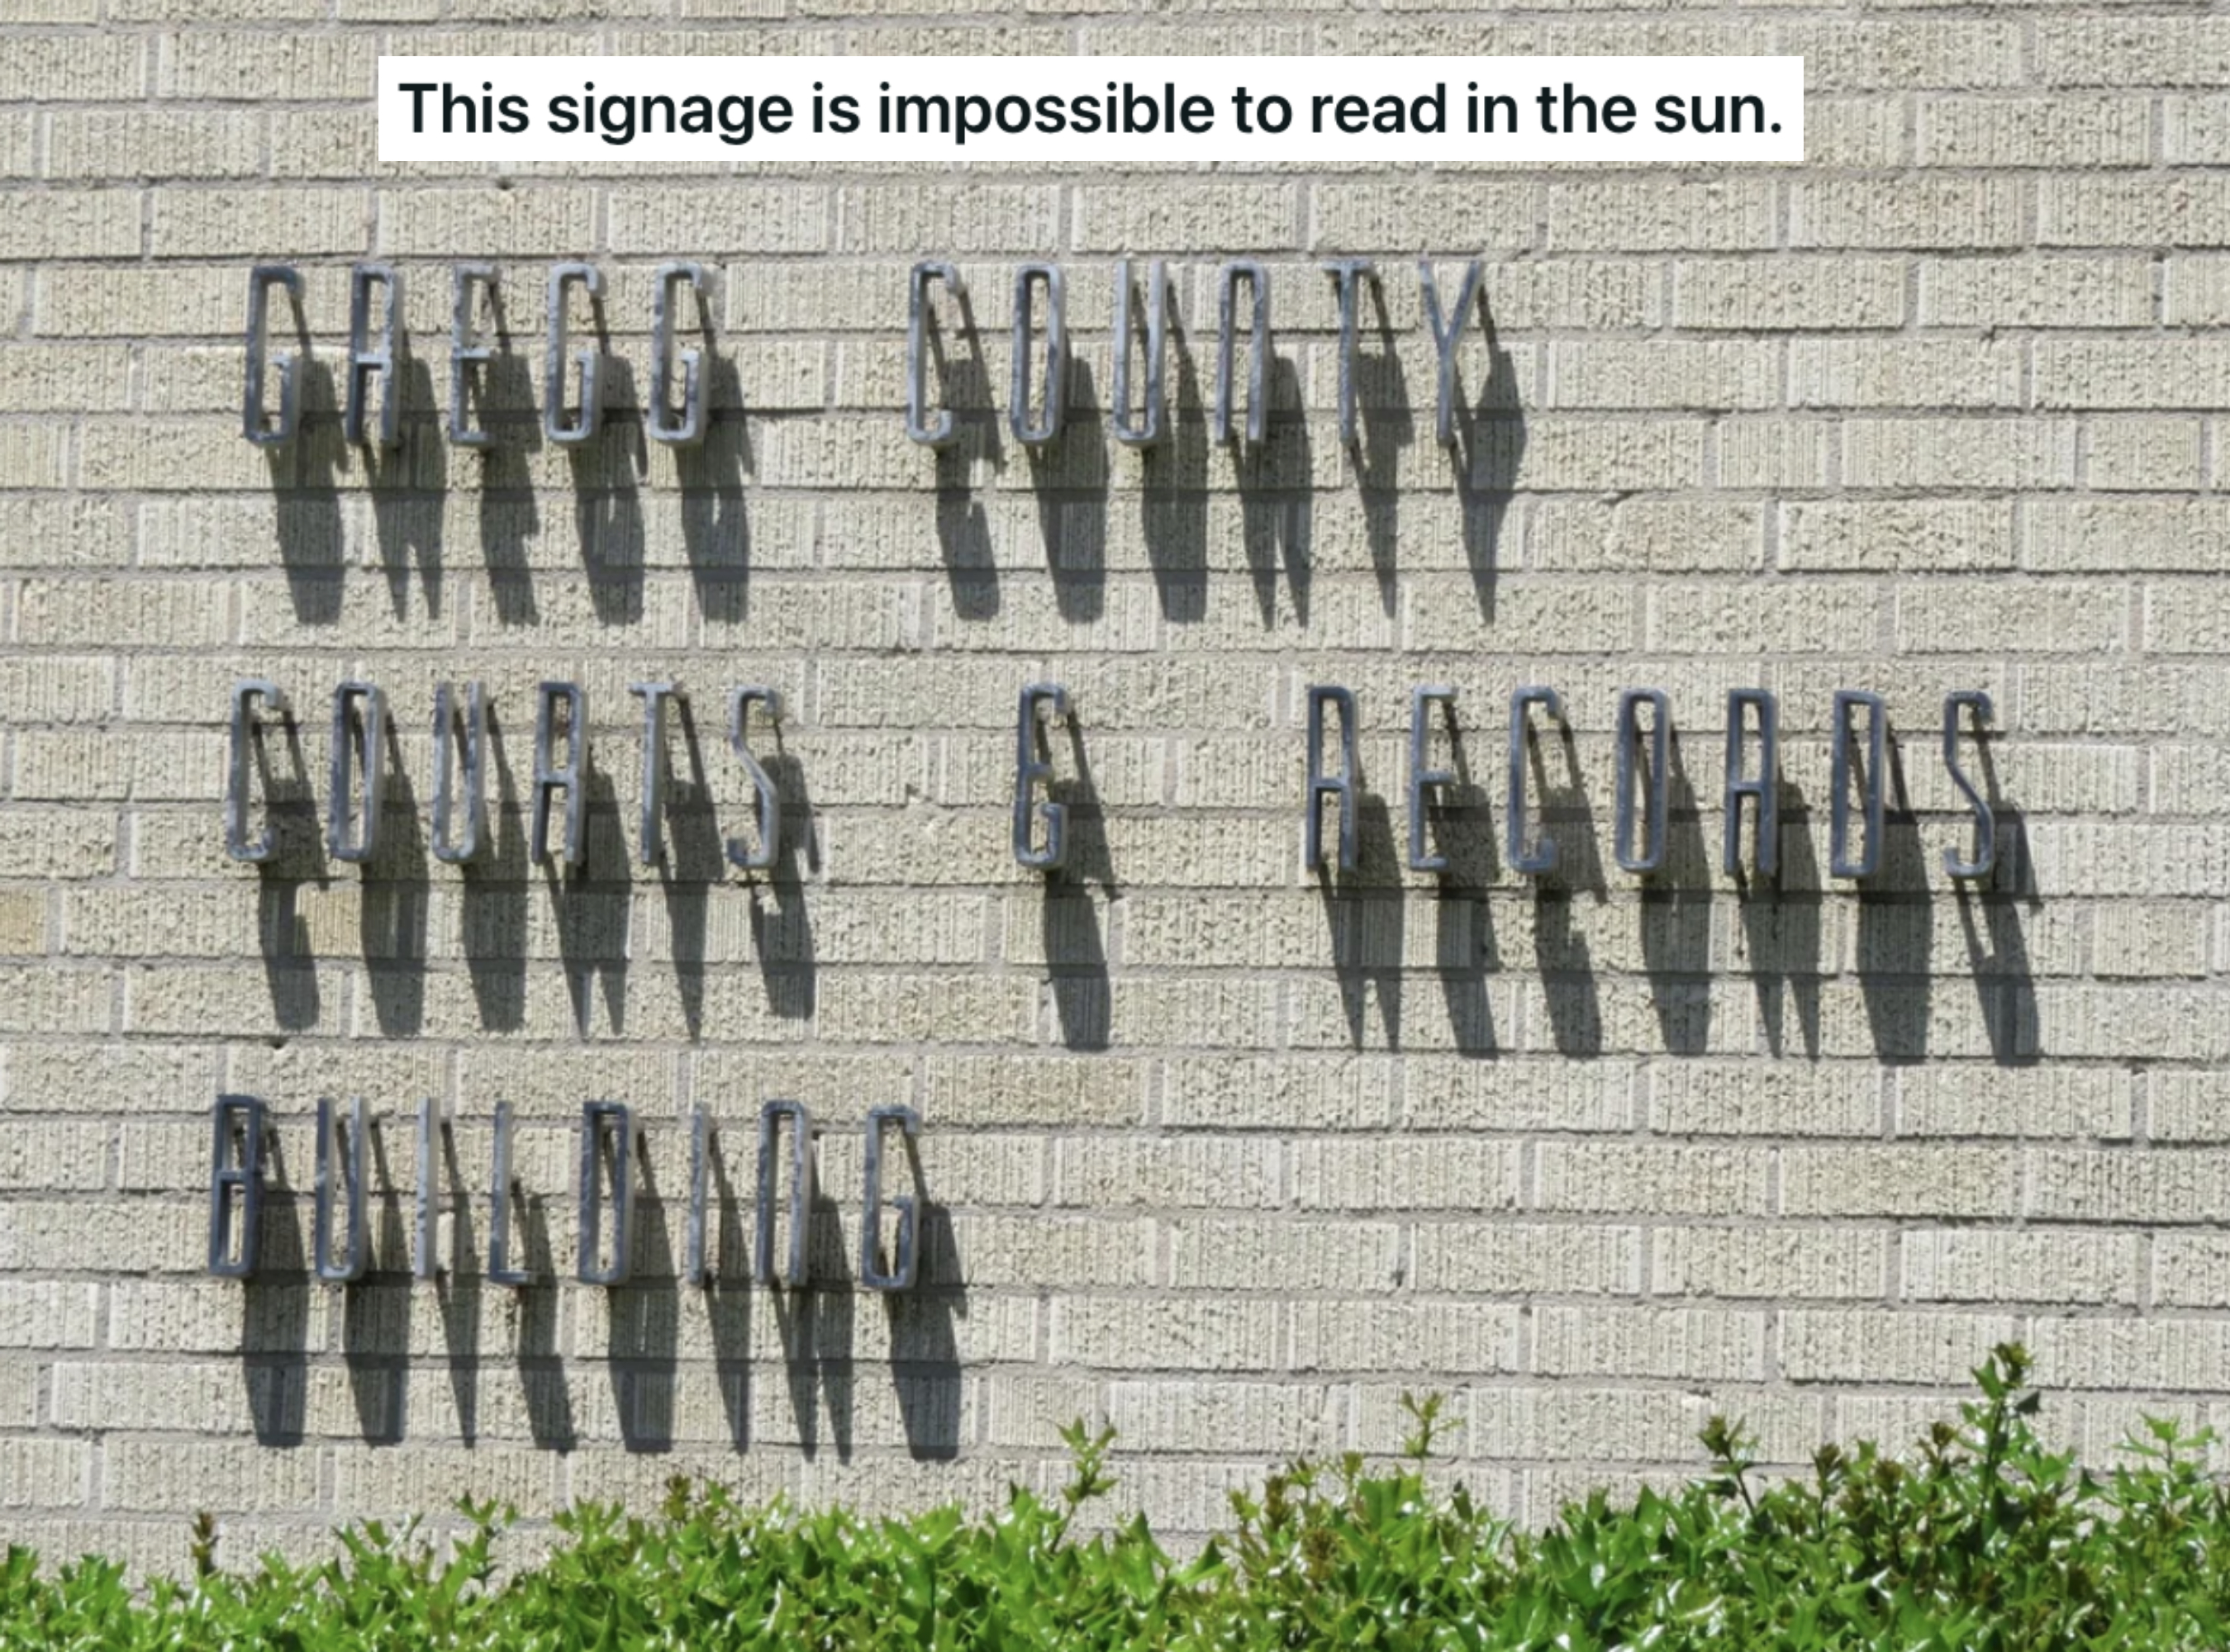 &quot;This signage is impossible to read in the sun.&quot;